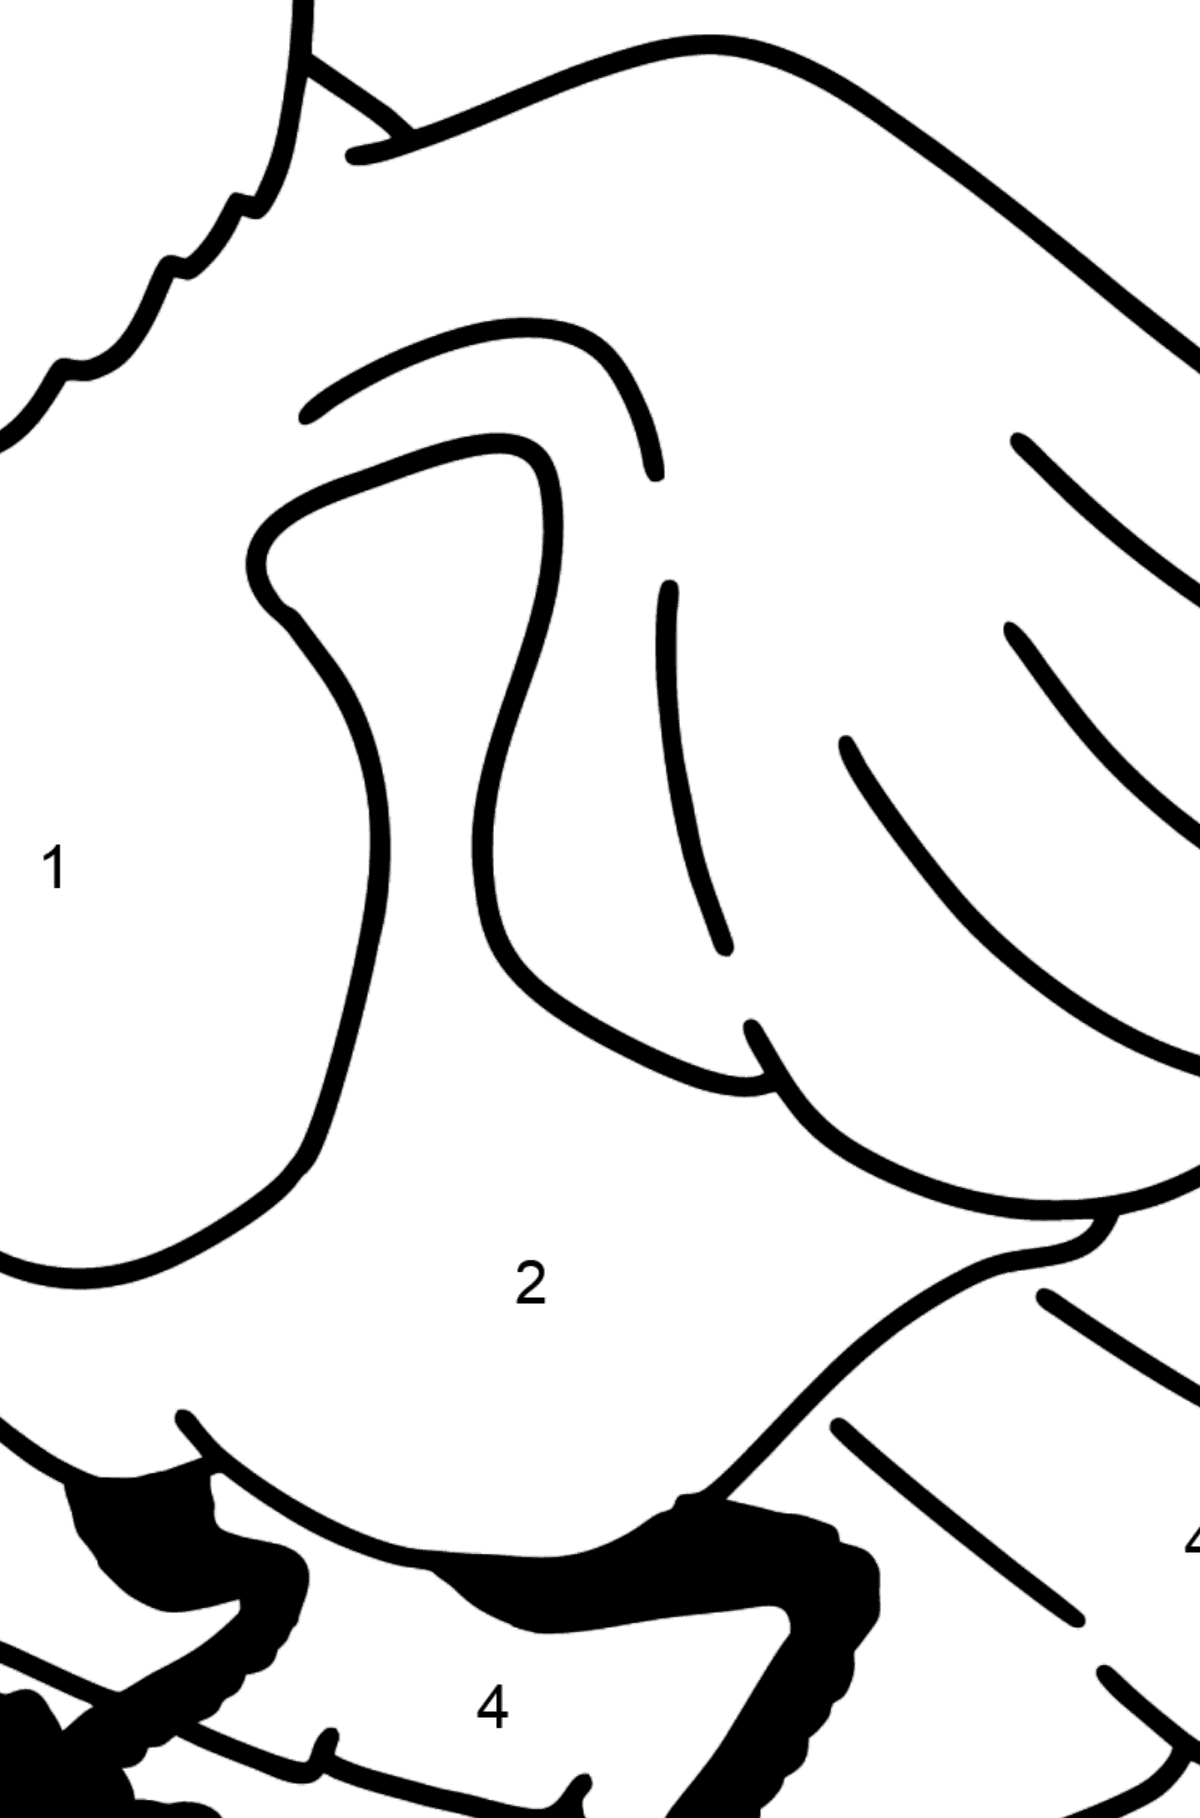 Dove coloring page - Coloring by Numbers for Kids